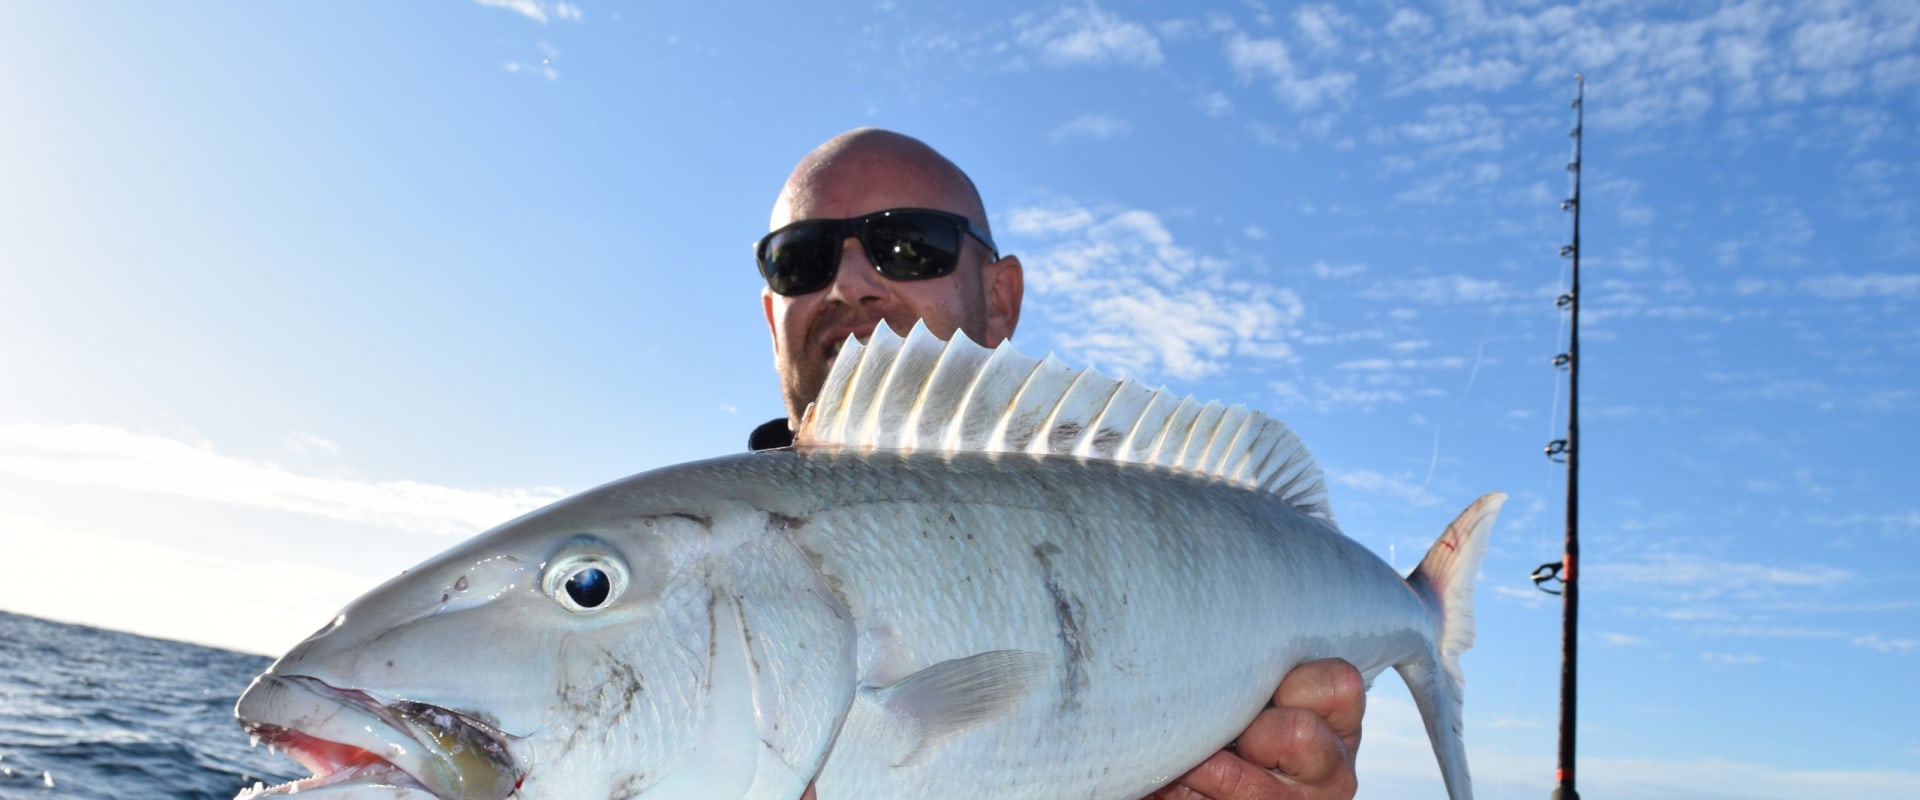 Tin Can Bay Fishing Charters: An Adventure for All Skill Levels